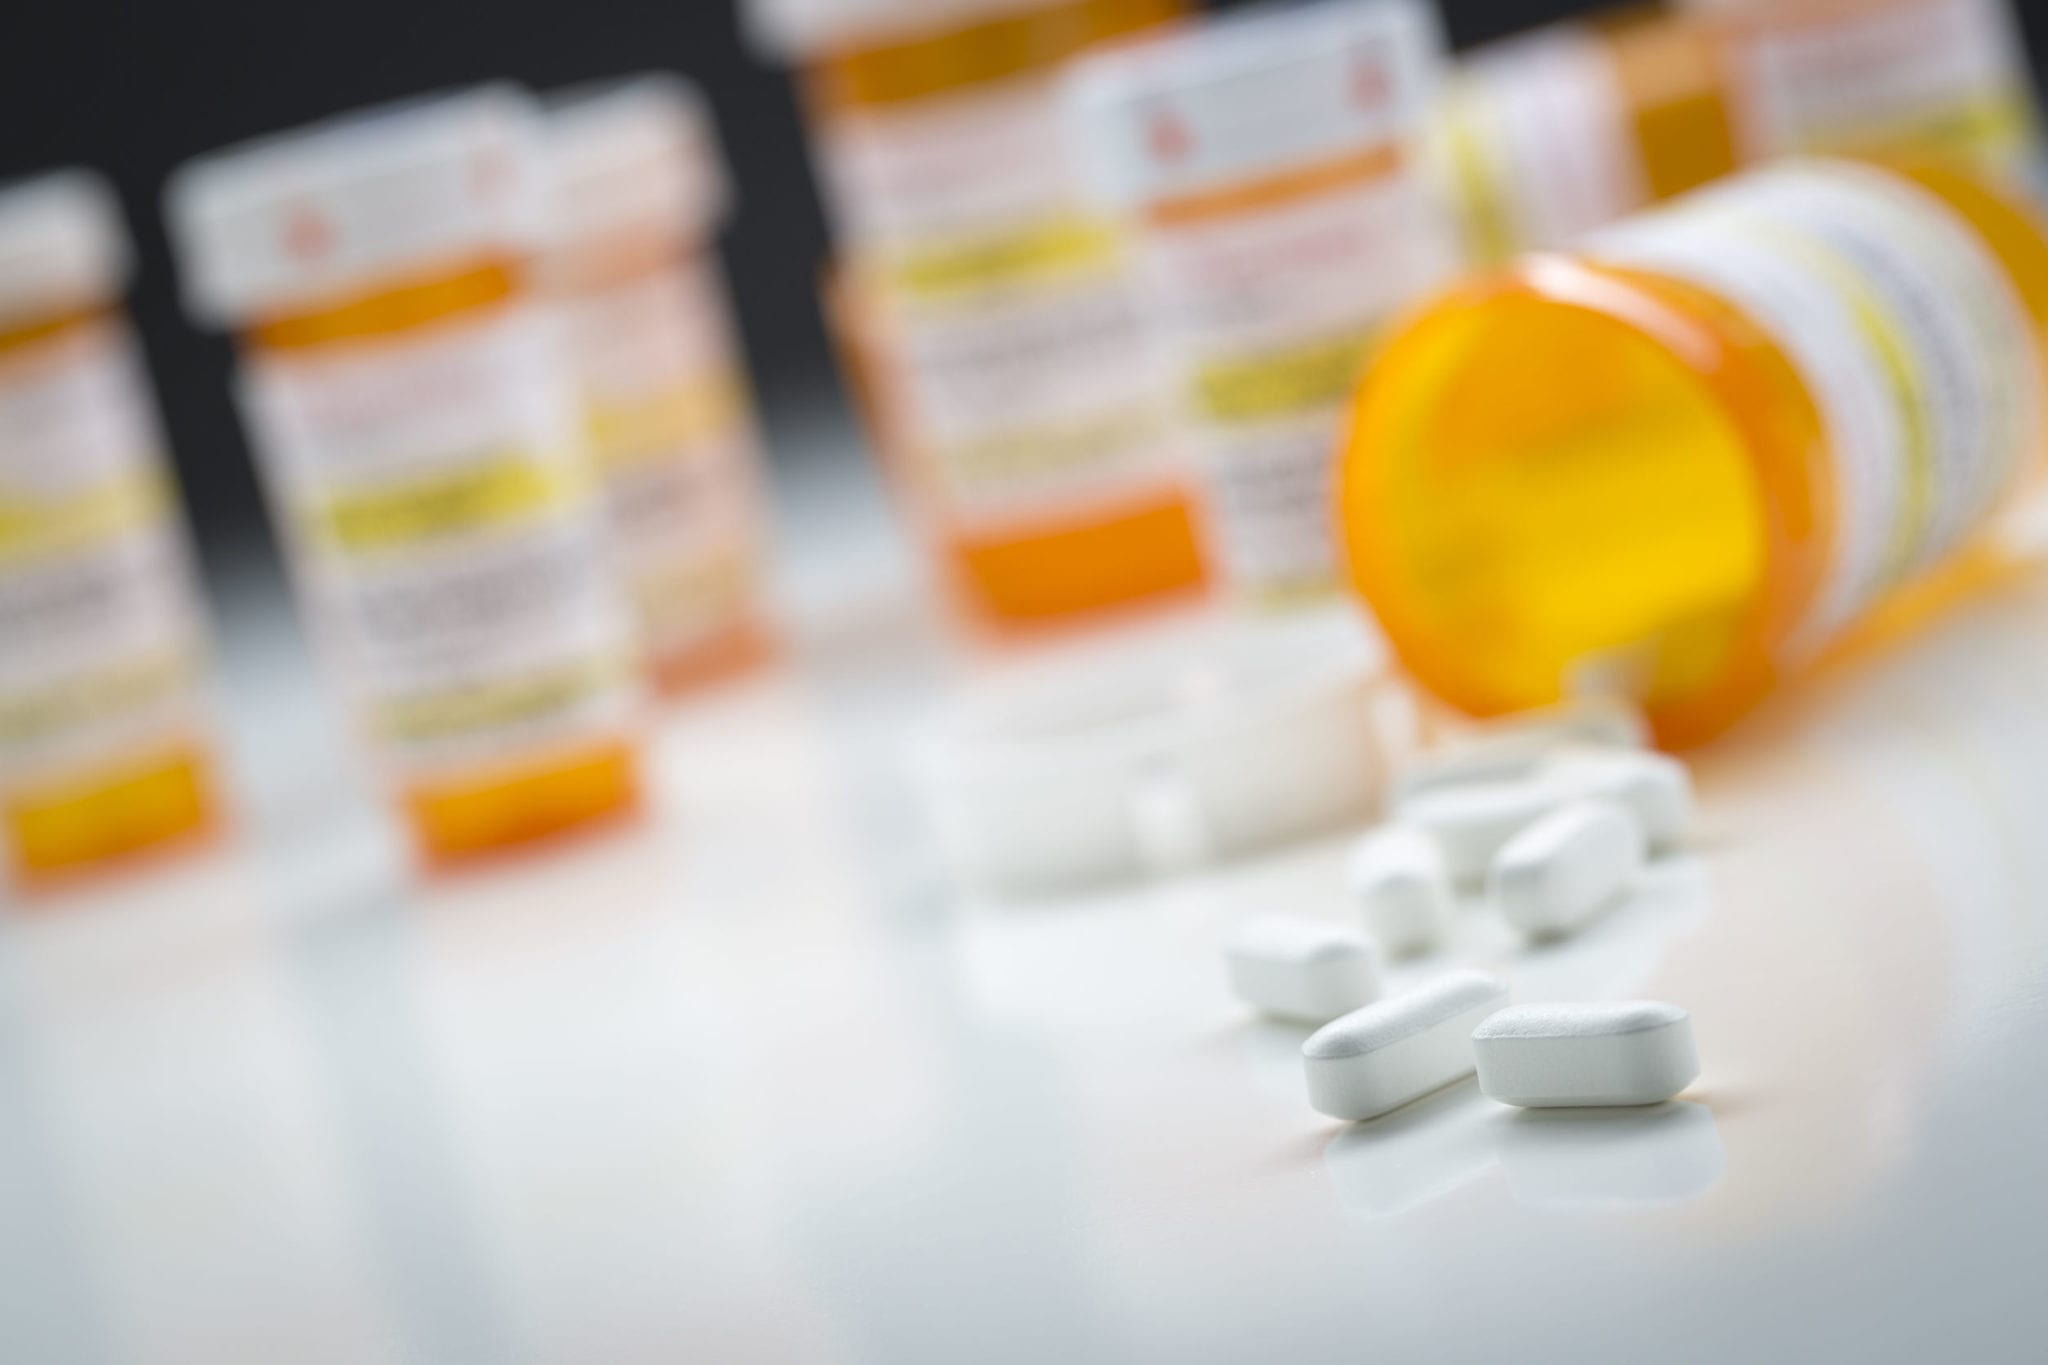 Doctors Who Overprescribe Drugs May End Up in Federal Prison